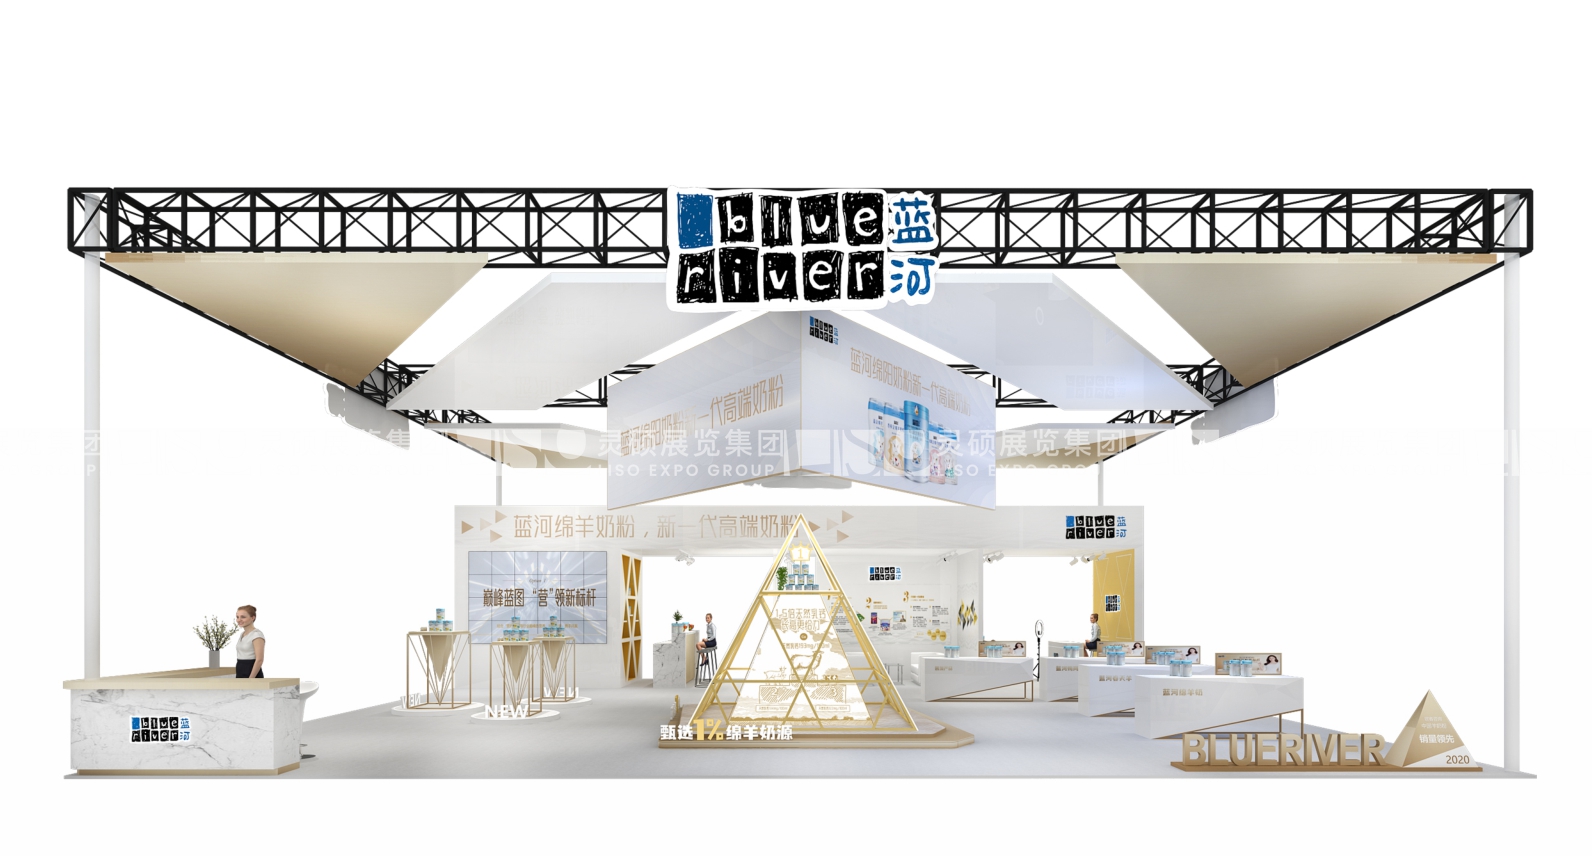 Blue River-CIIE Booth Design and Construction Case